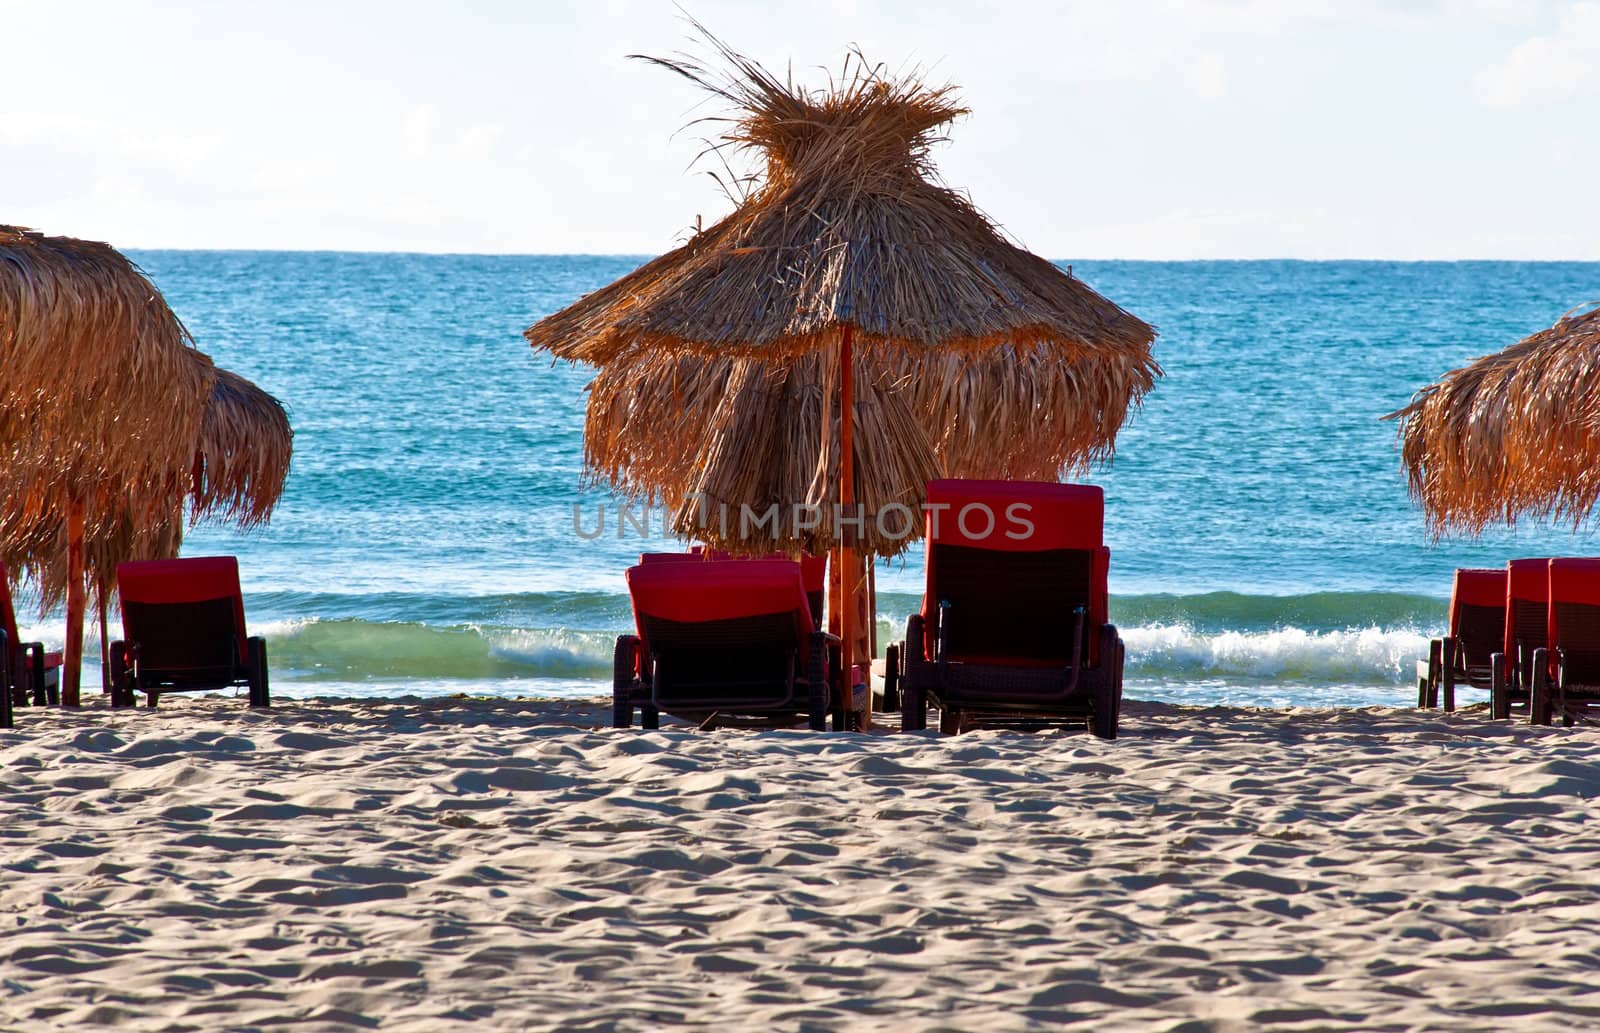 View of the beach with loungers and umbrellas.